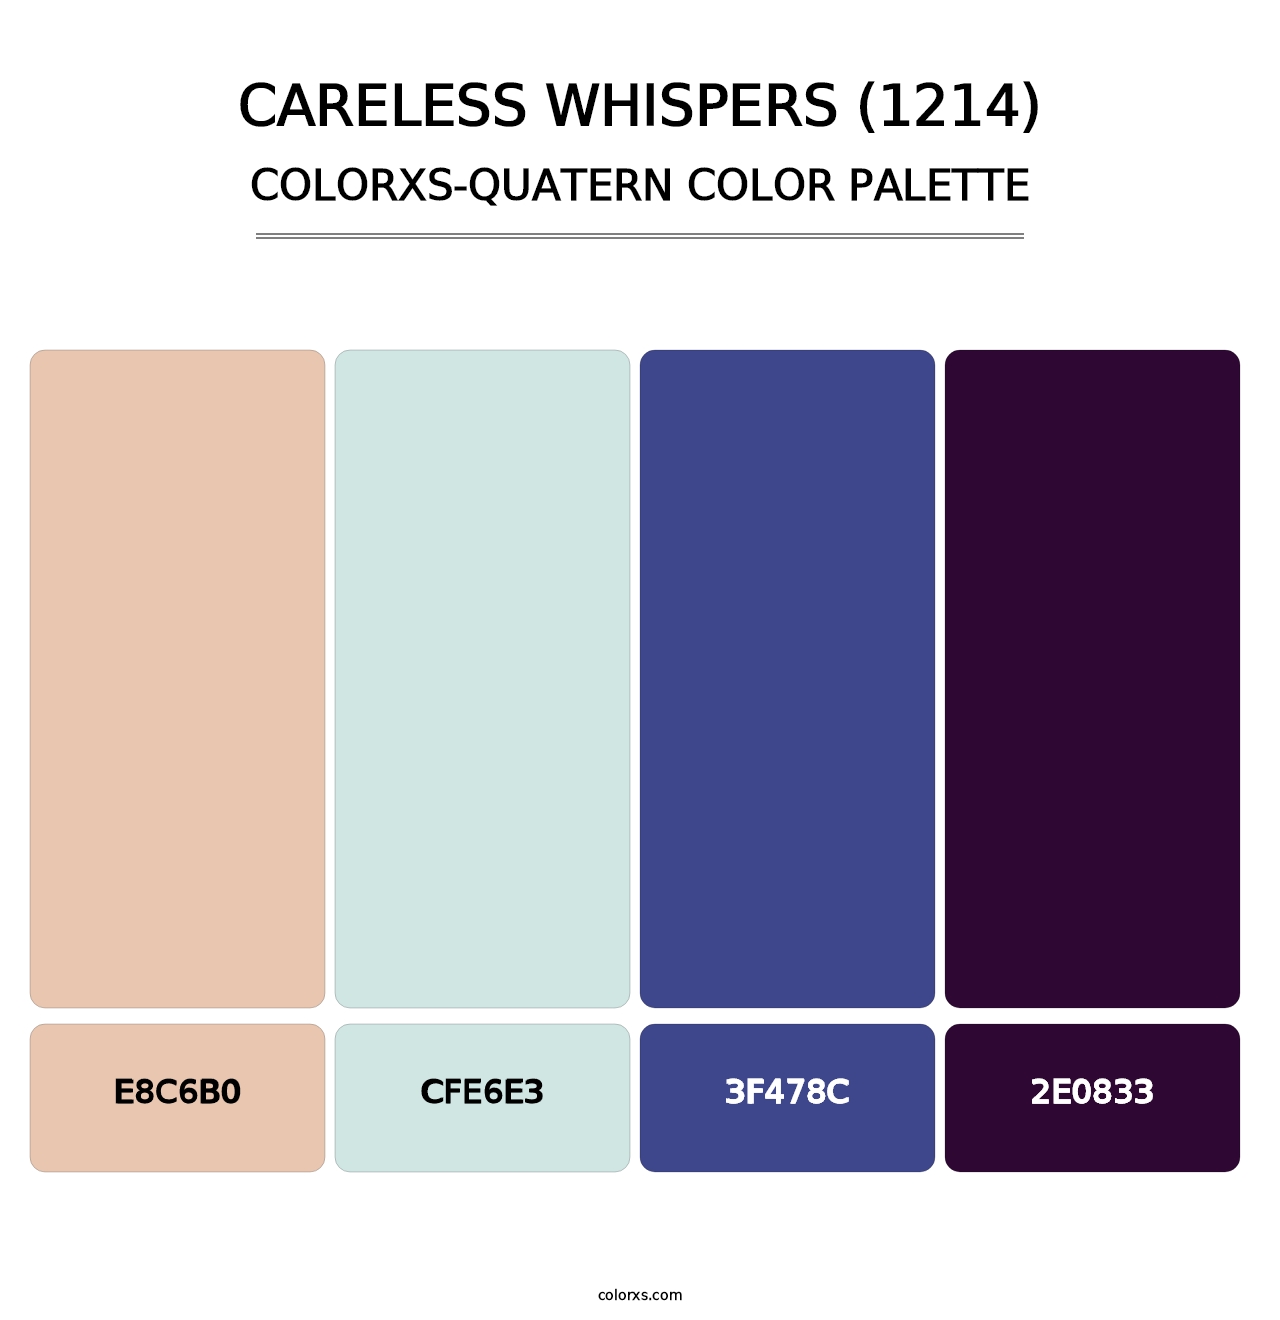 Careless Whispers (1214) - Colorxs Quatern Palette